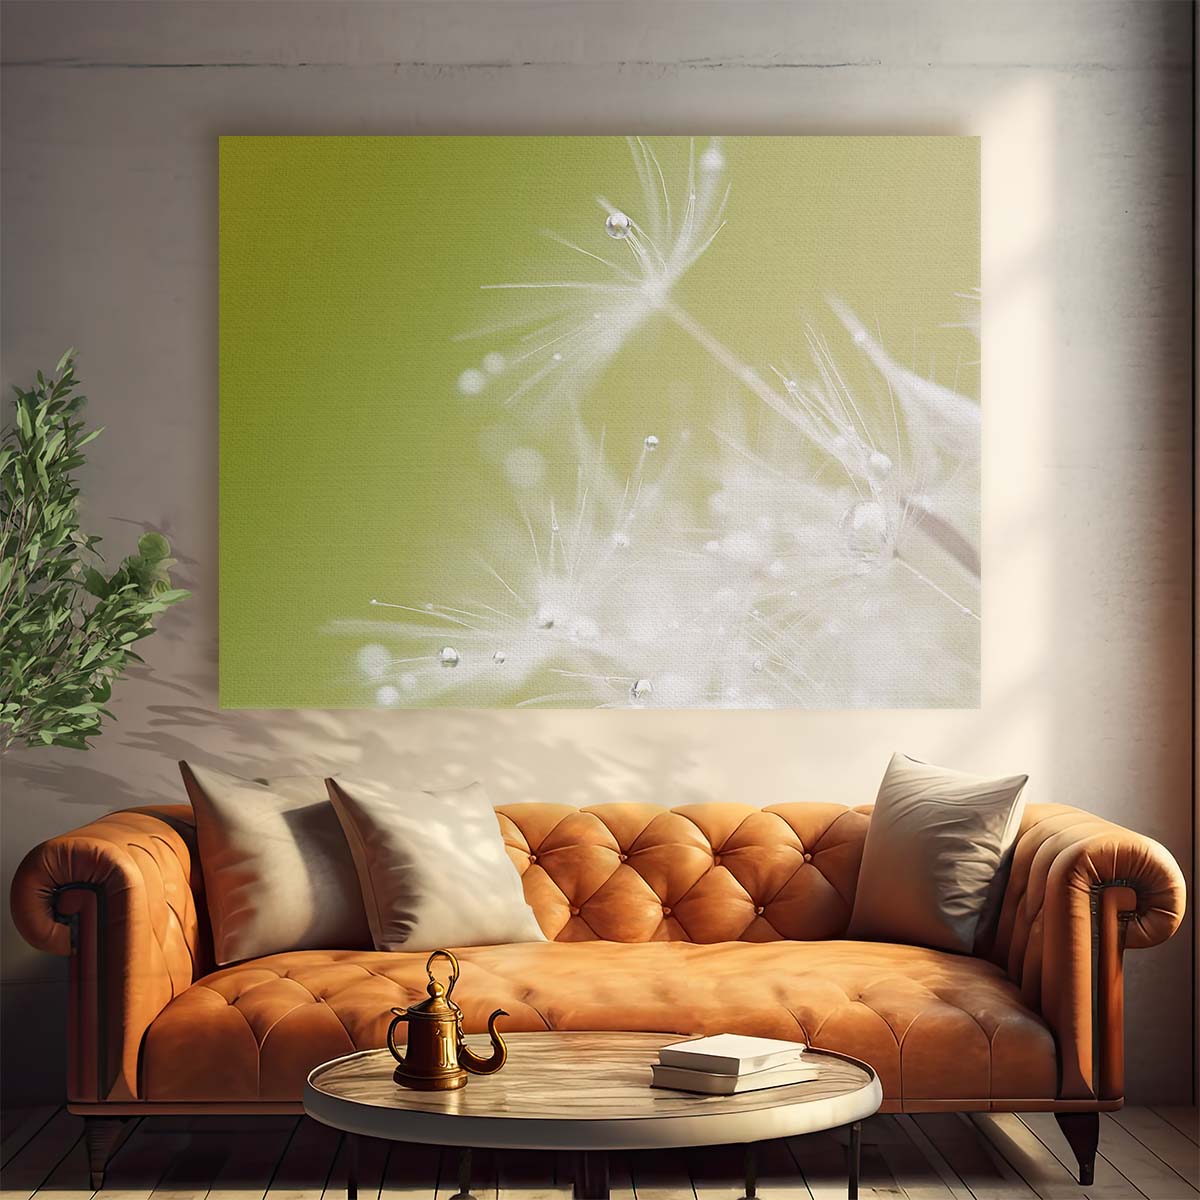 Delicate White Dandelion & Water Drops Macro Wall Art by Luxuriance Designs. Made in USA.